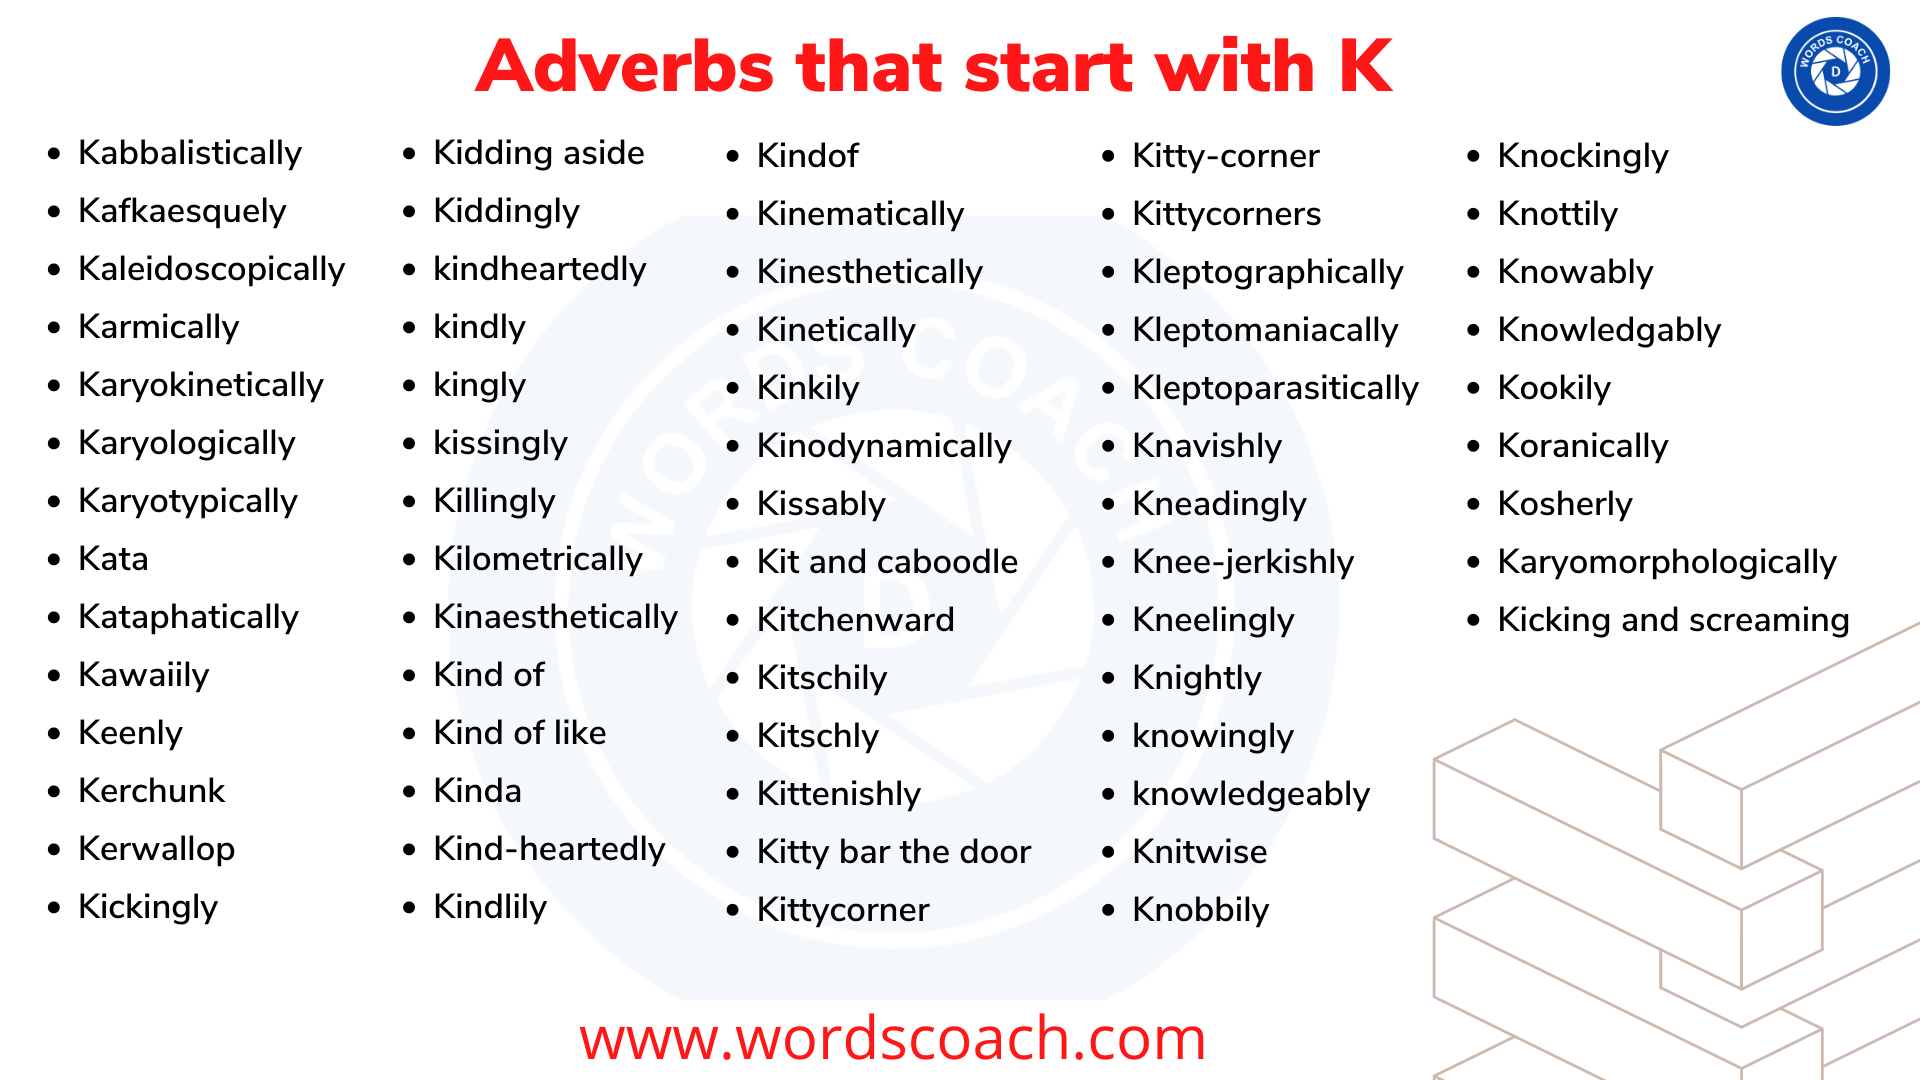 Adverbs that start with K - wordscoach.com